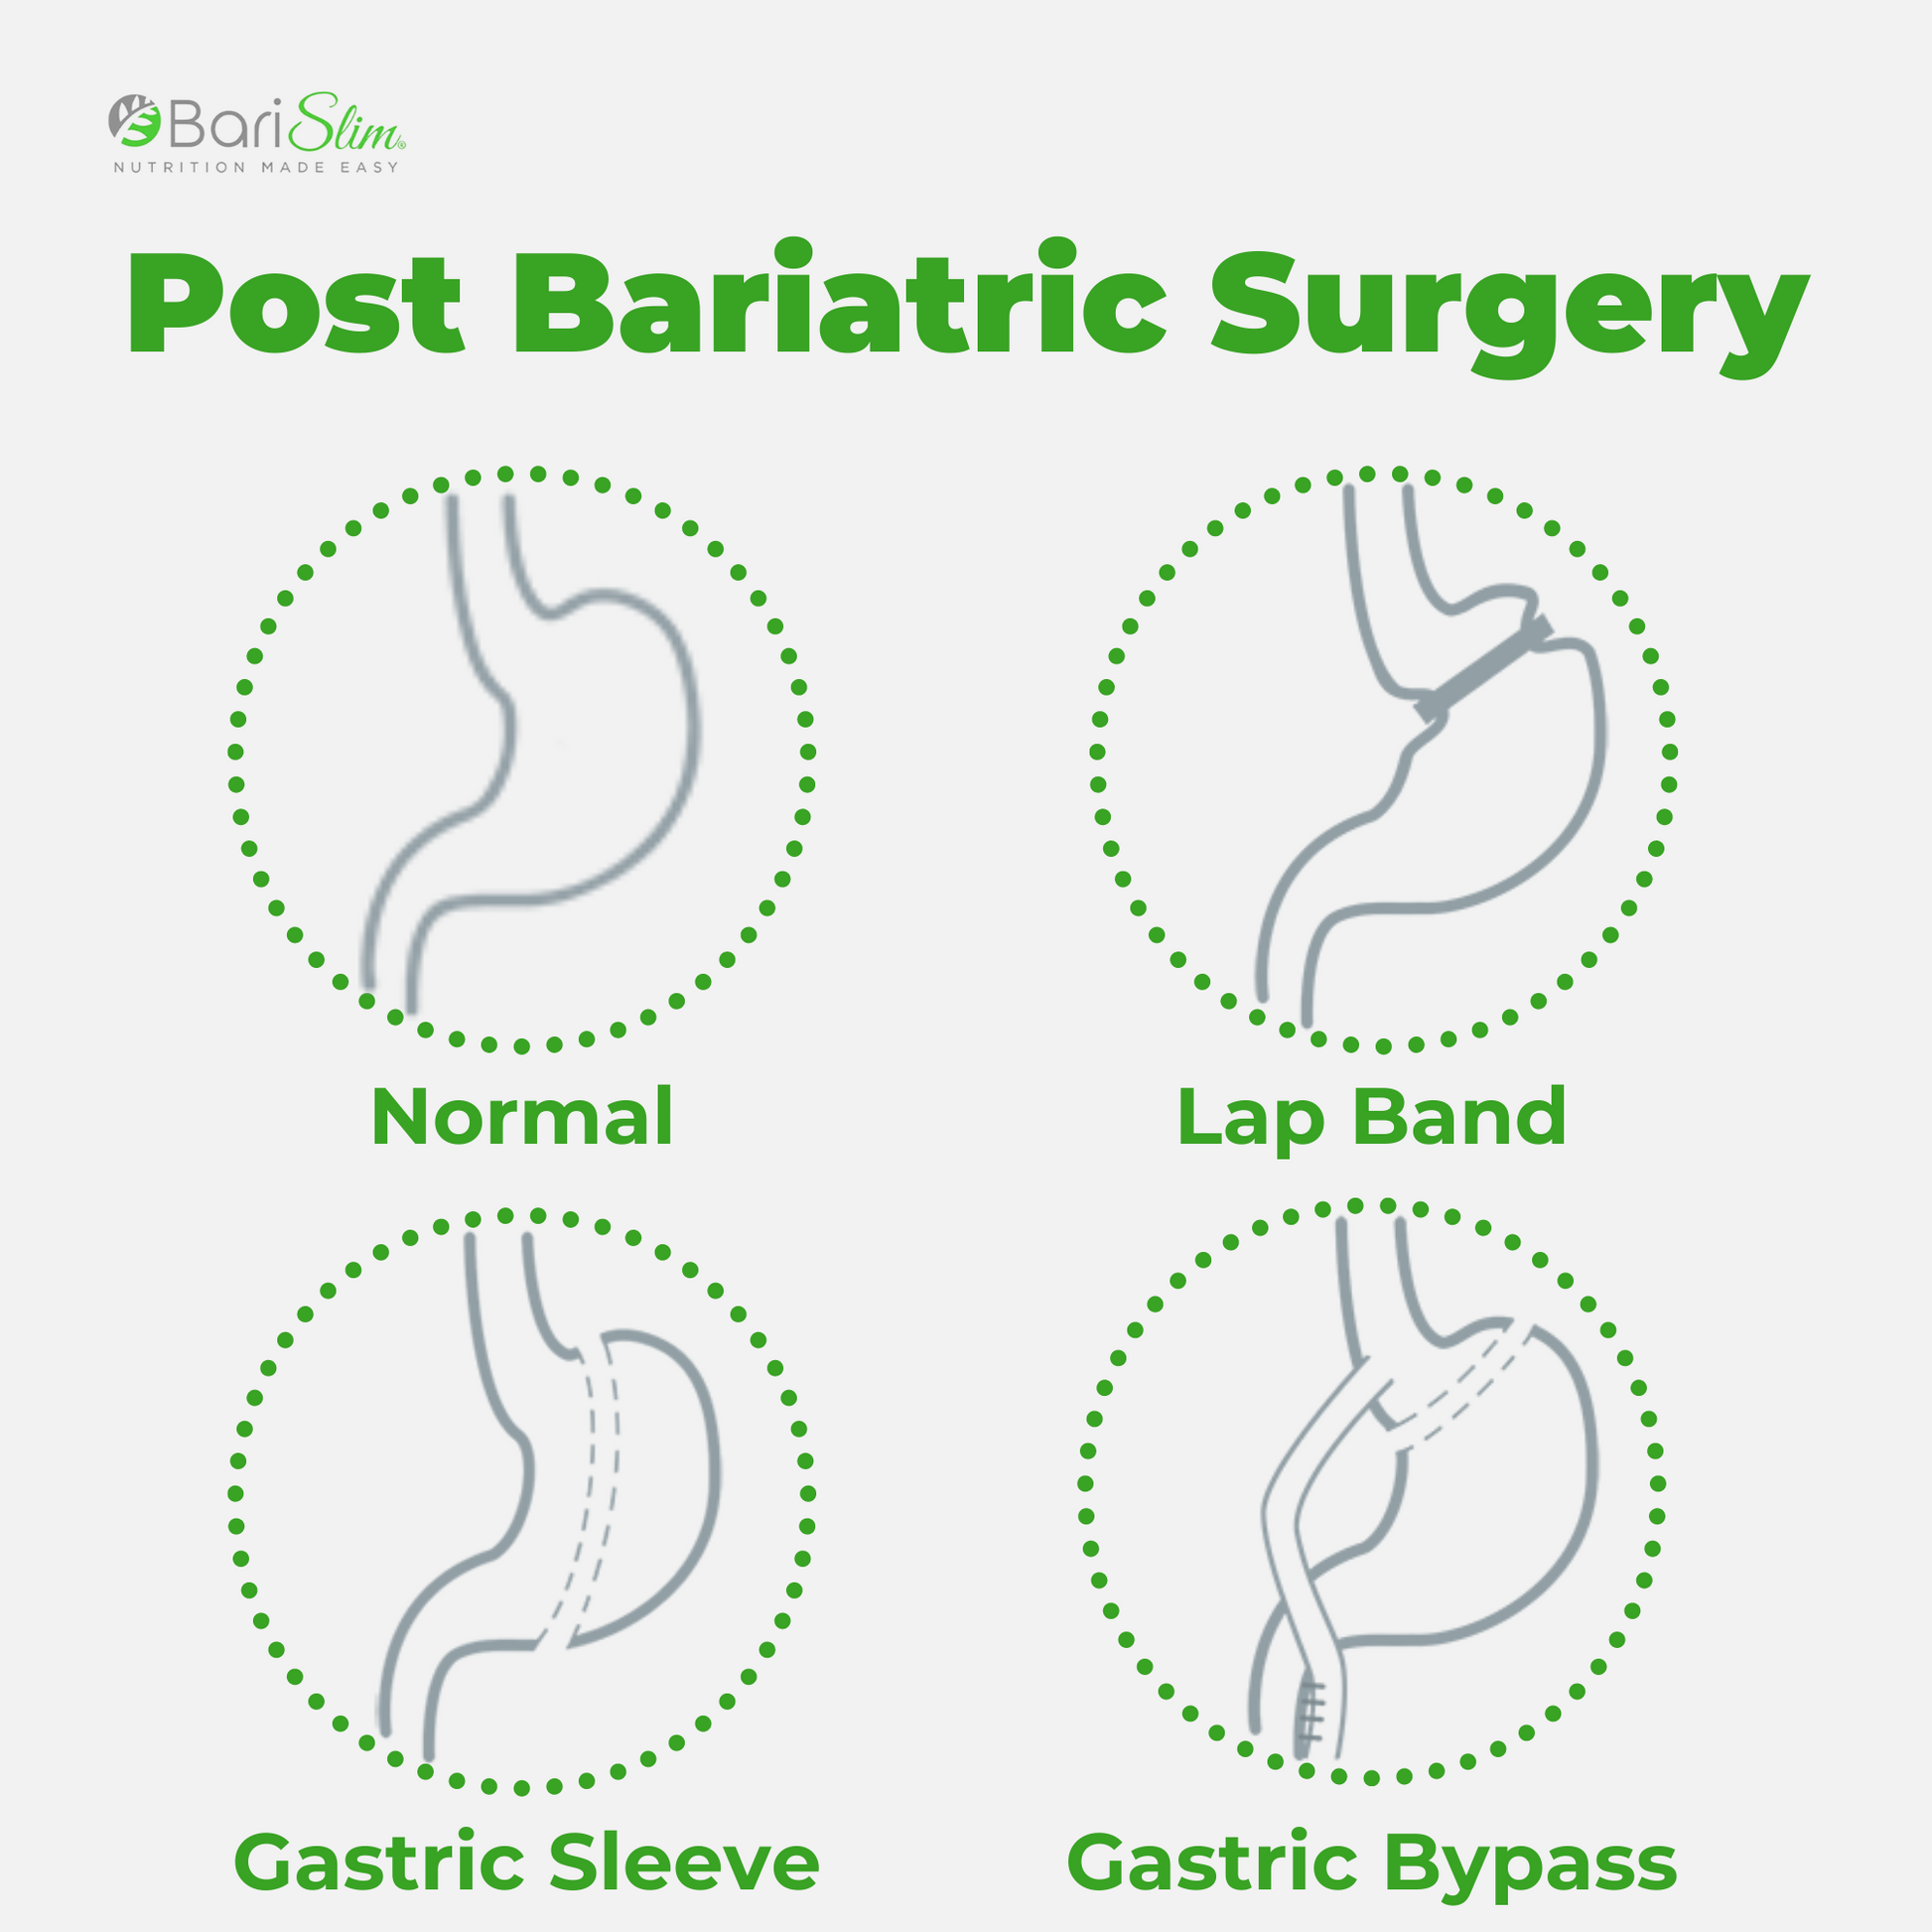 Post Bariatric Surgery - lap band, gastric sleeve and gastric bypass